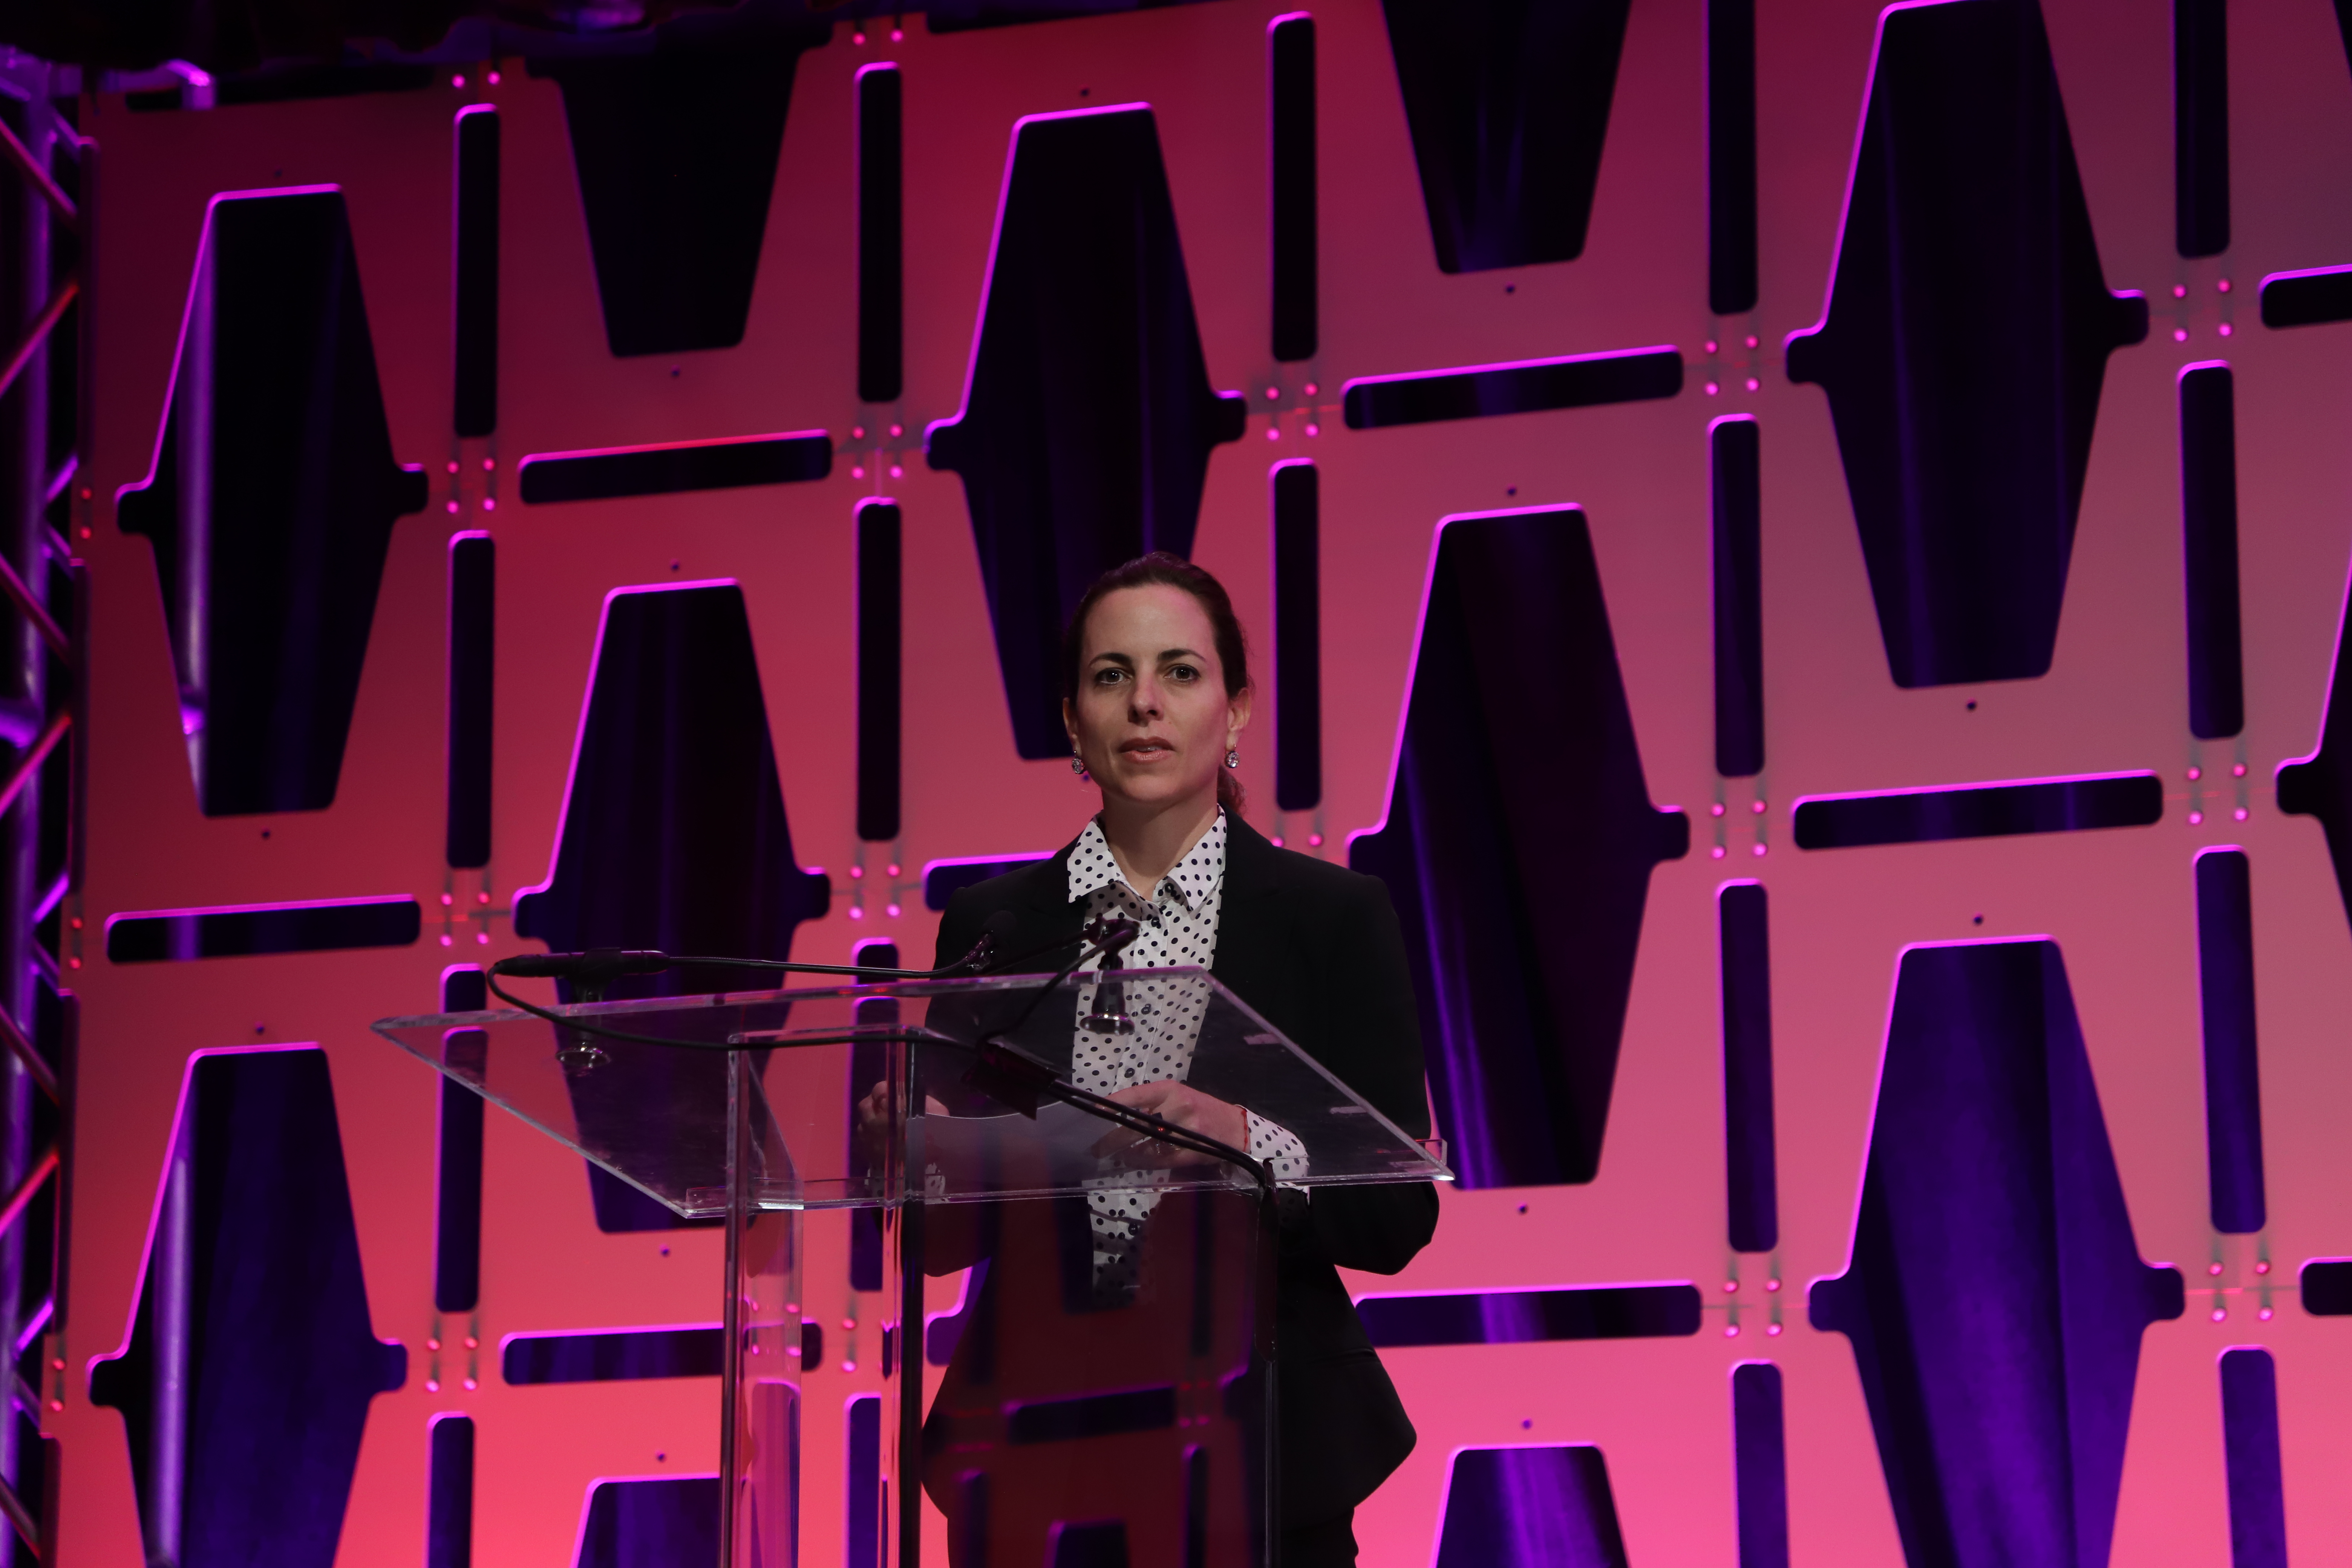 Adriana Cisneros, CEO Grupo Cisneros, introduces the awards. (Photo by John Parra/Getty Images for Parrot Analytics)